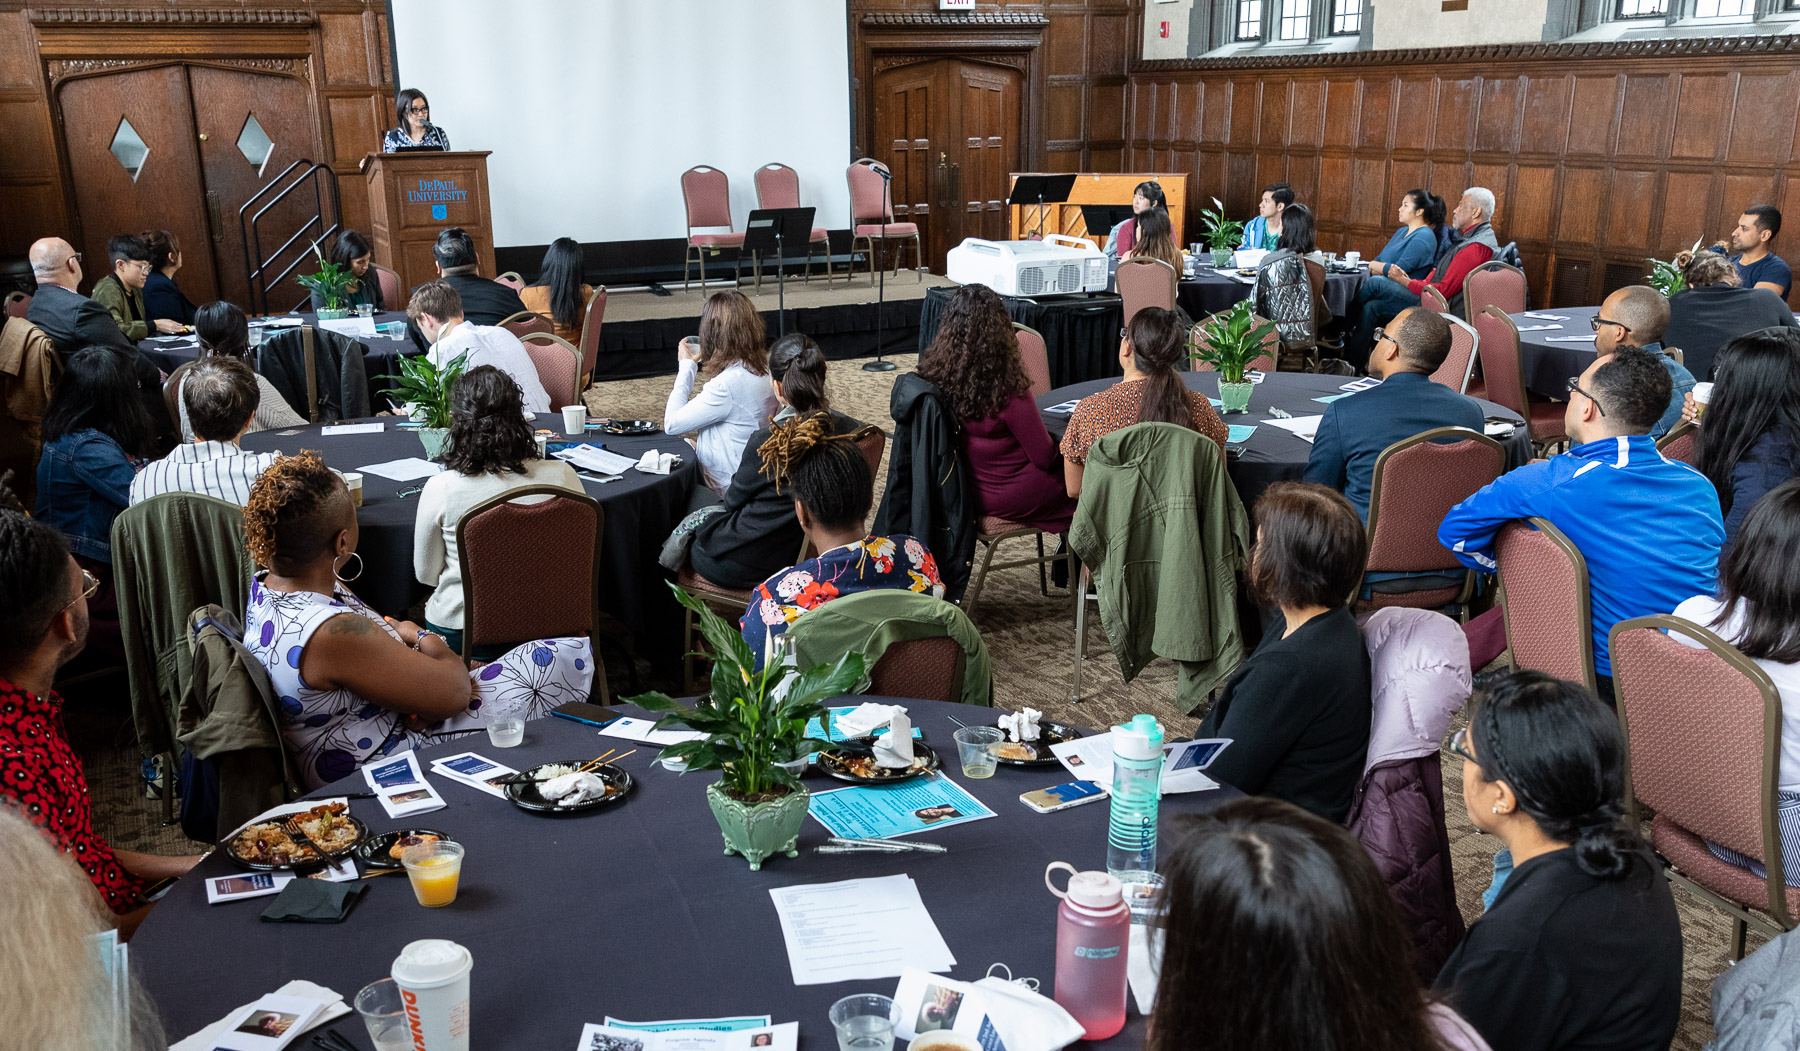 Tuyet Le, a pan-Asian advocate, delivers a keynote address during the second annual Grace Lee Boggs Heritage Breakfast on May 9. (DePaul University/Jeff Carrion)